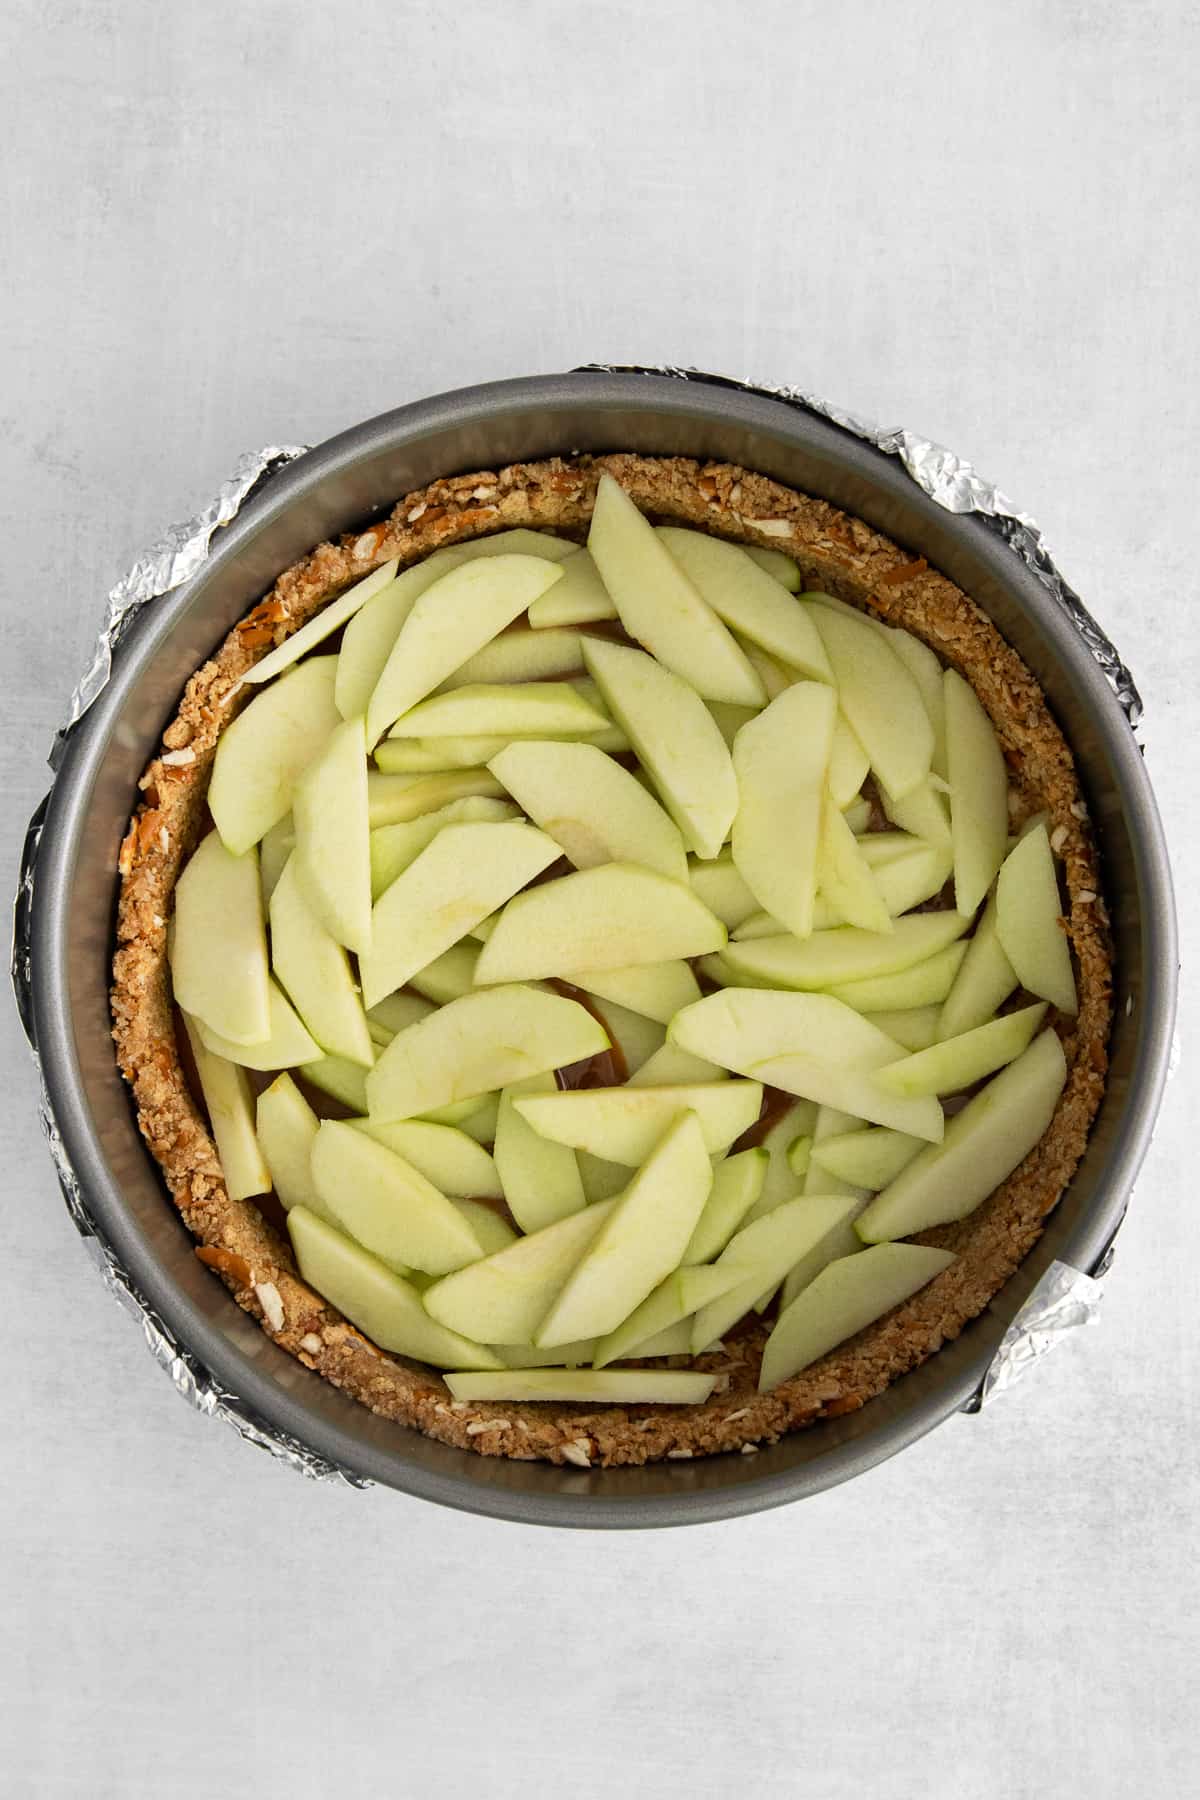 Sliced apples placed over caramel and a cheesecake crust.